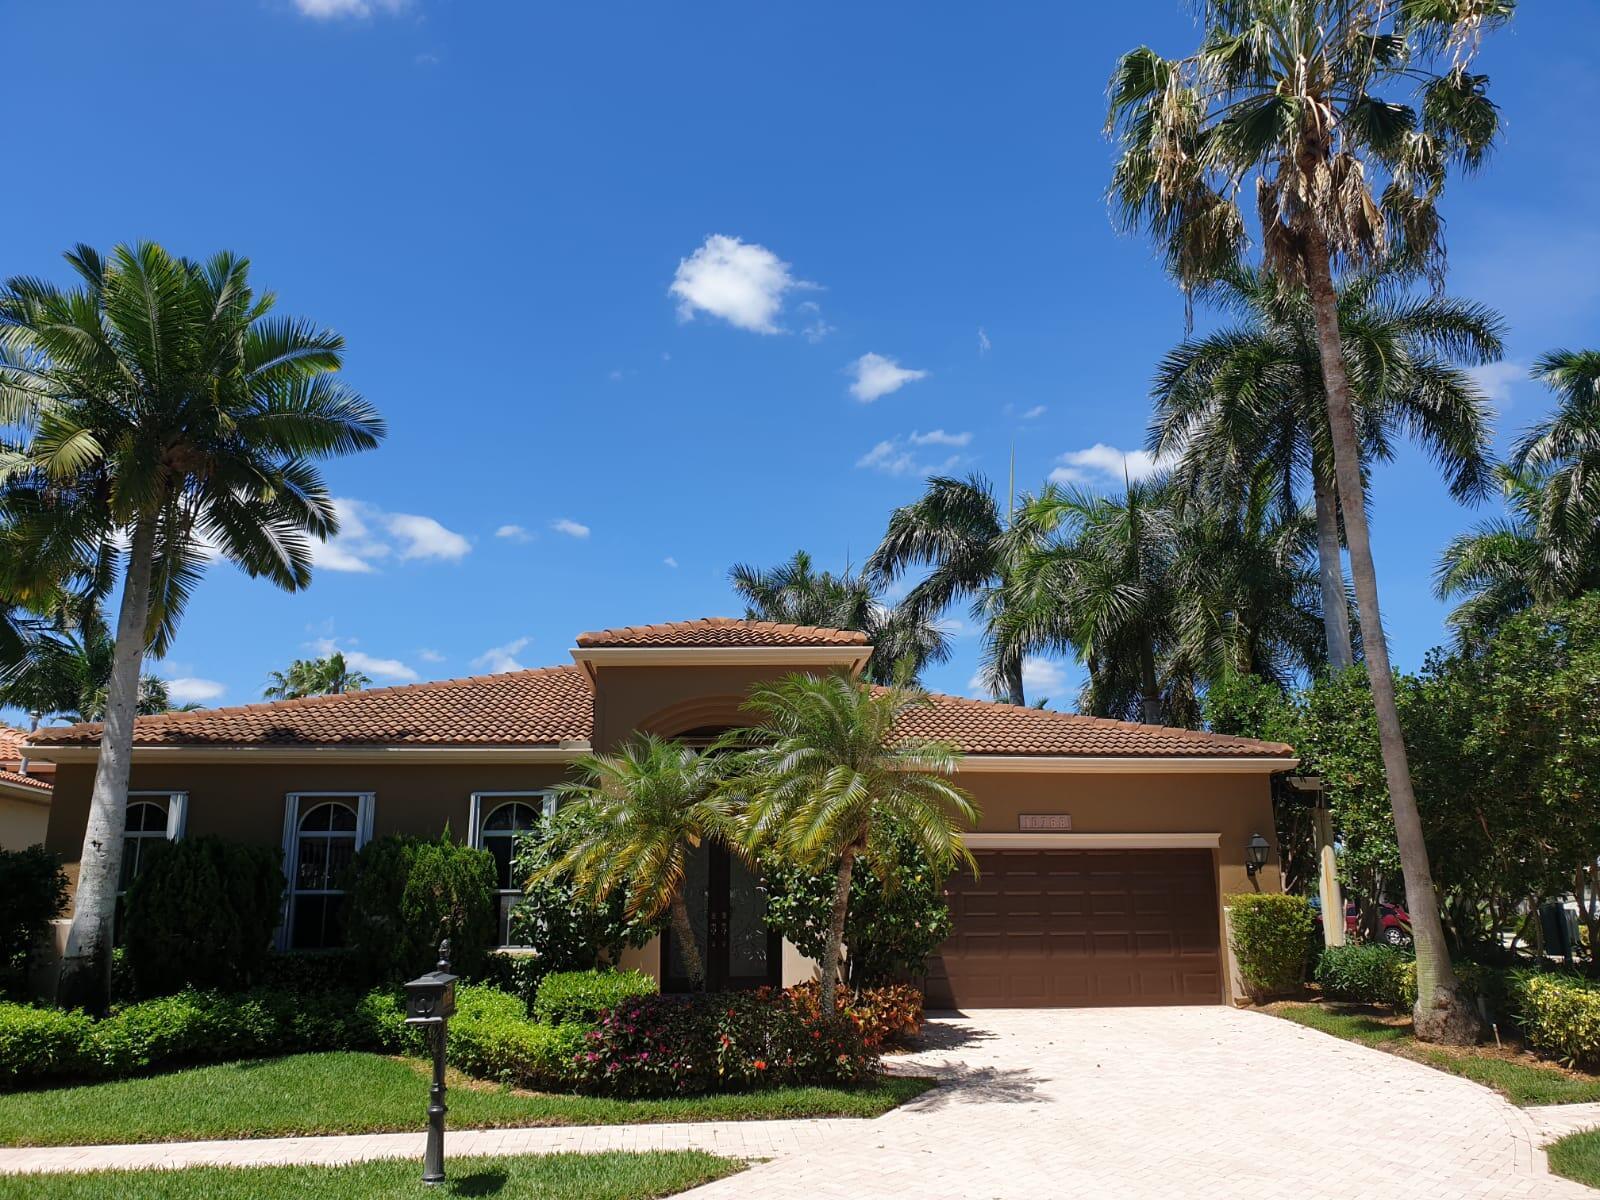 Photo 1 of 10768 Waterford Place in West Palm Beach - MLS R10939171